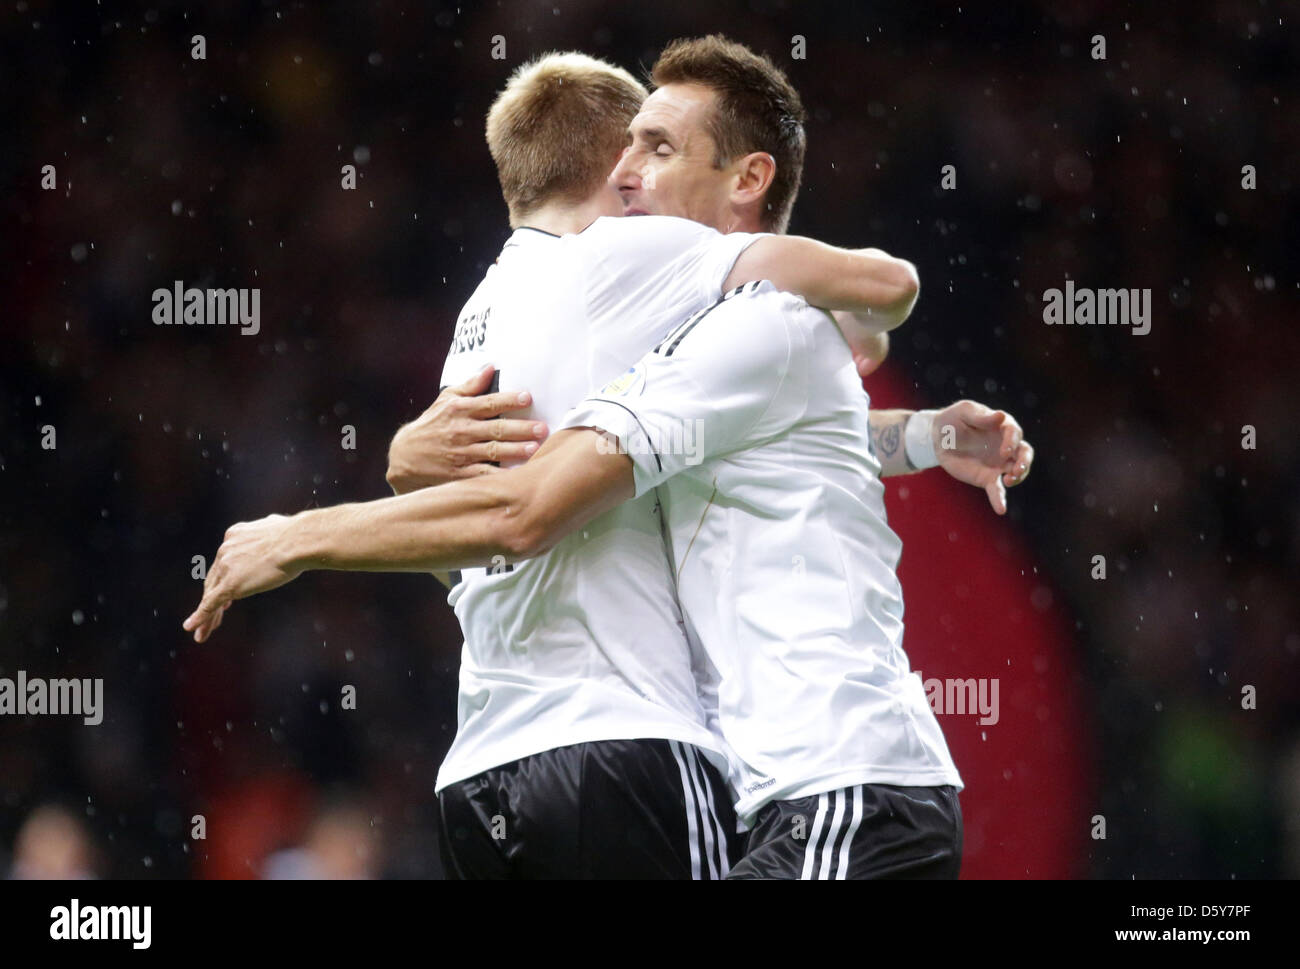 Germany's Miroslav Klose celebrates with team mate Marco Reus (L) after scoring the opening goal 1-0 during the FIFA World Cup 2014 qualifying soccer match between Germany and Sweden at Olympic stadium in Berlin, Germany, 16 October 2012. Photo: Michael Kappeler/dpa  +++(c) dpa - Bildfunk+++ Stock Photo